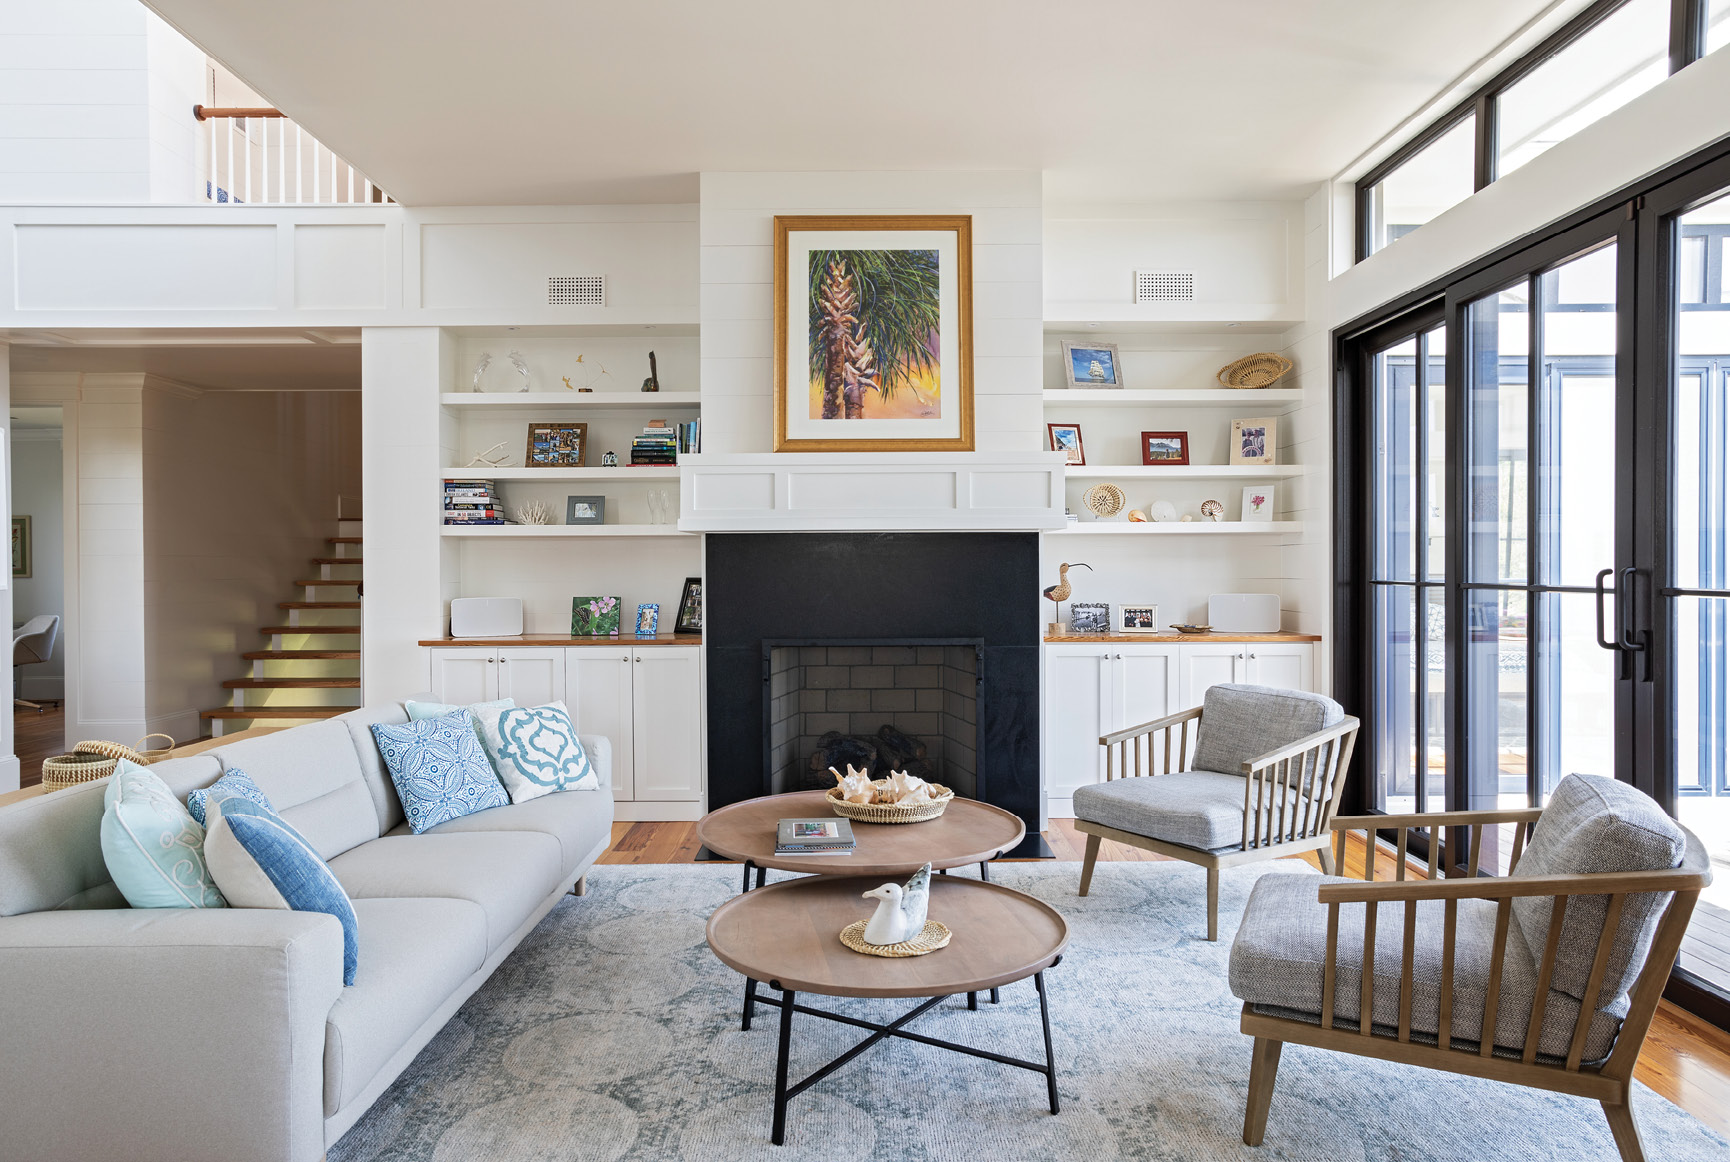 Lighten Up: The second floor embraces open-plan living with a large sitting room, dining room, and kitchen all flooded with natural light. The clean lines of modern furniture in a neutral color palette are enhanced by natural woods and pops of blue.